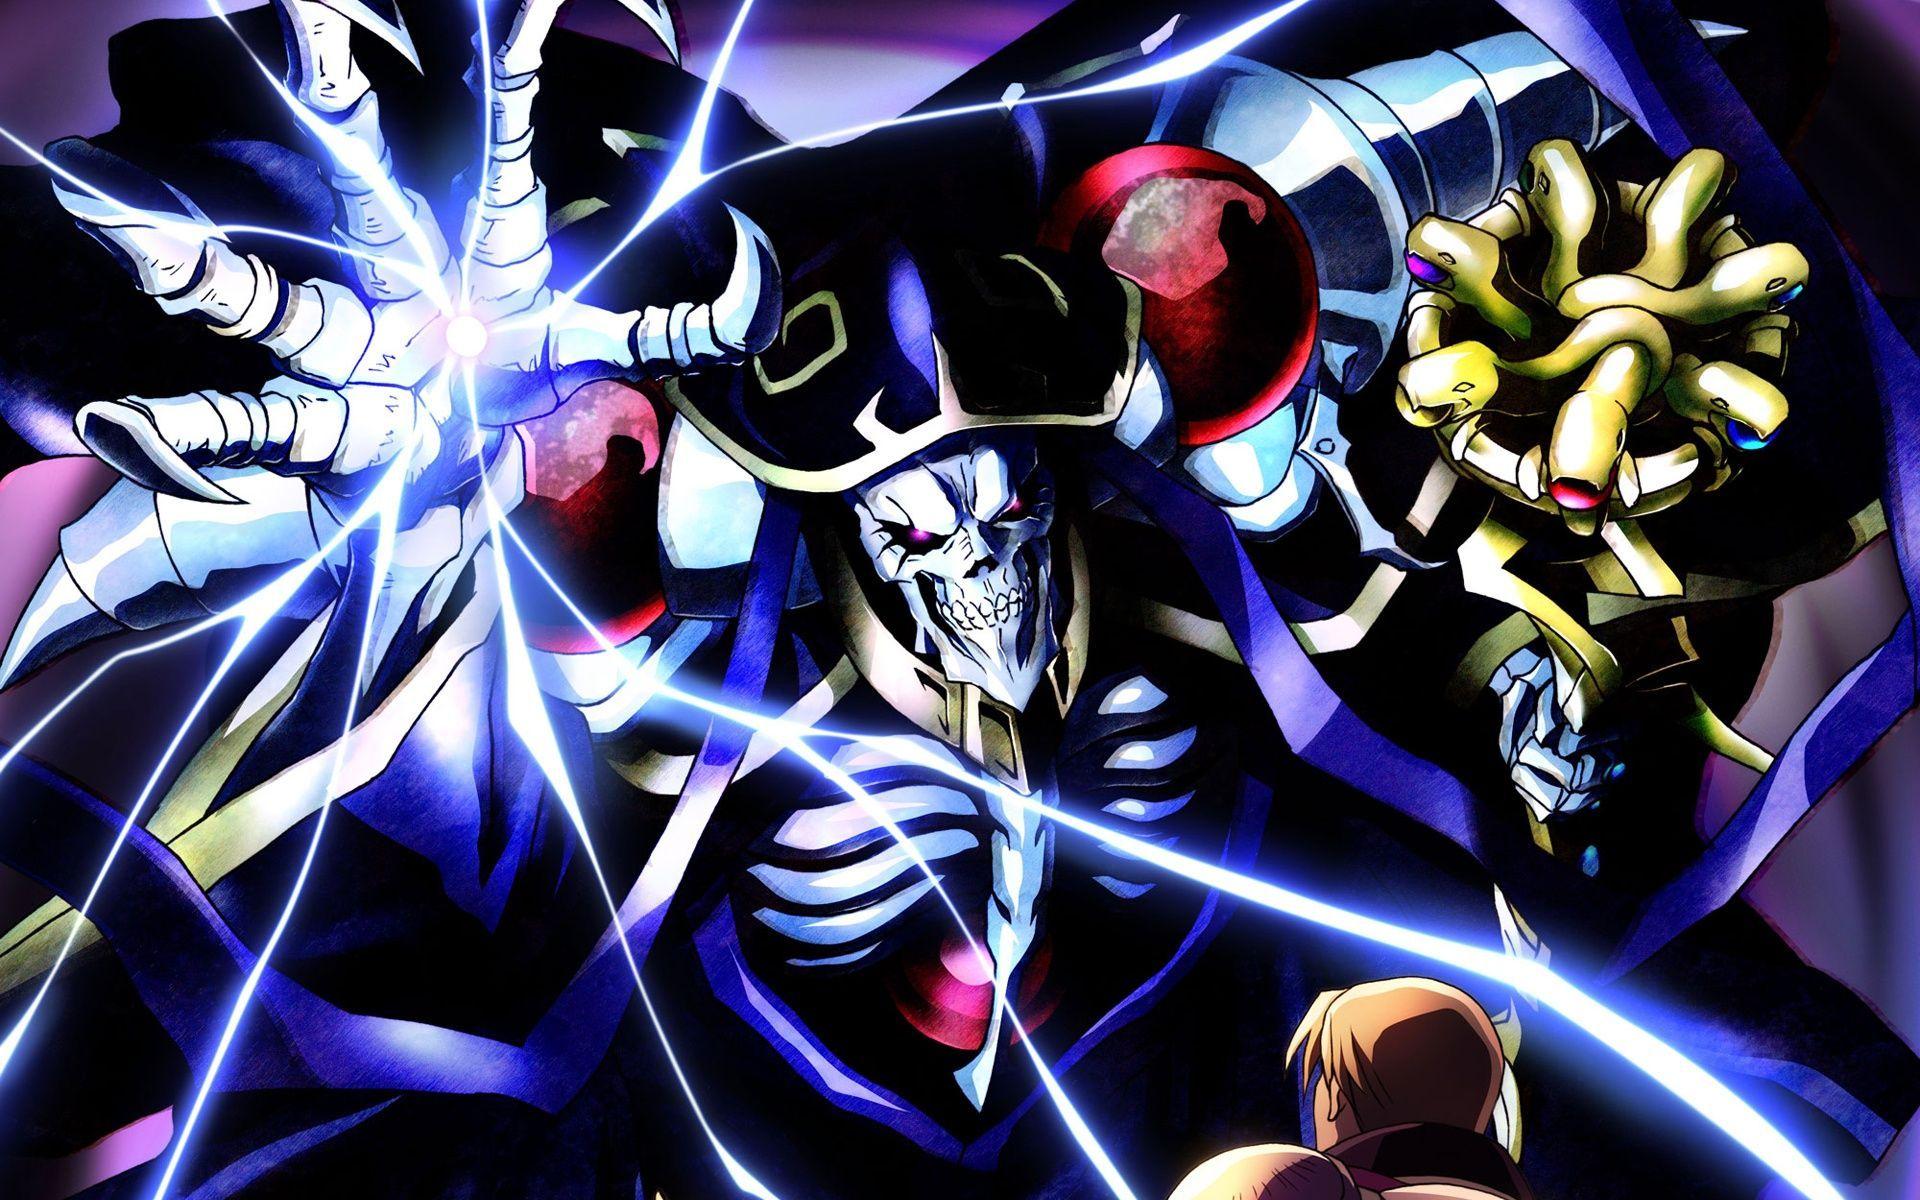 Anime Overlord Hd Wallpapers - Wallpaper Cave